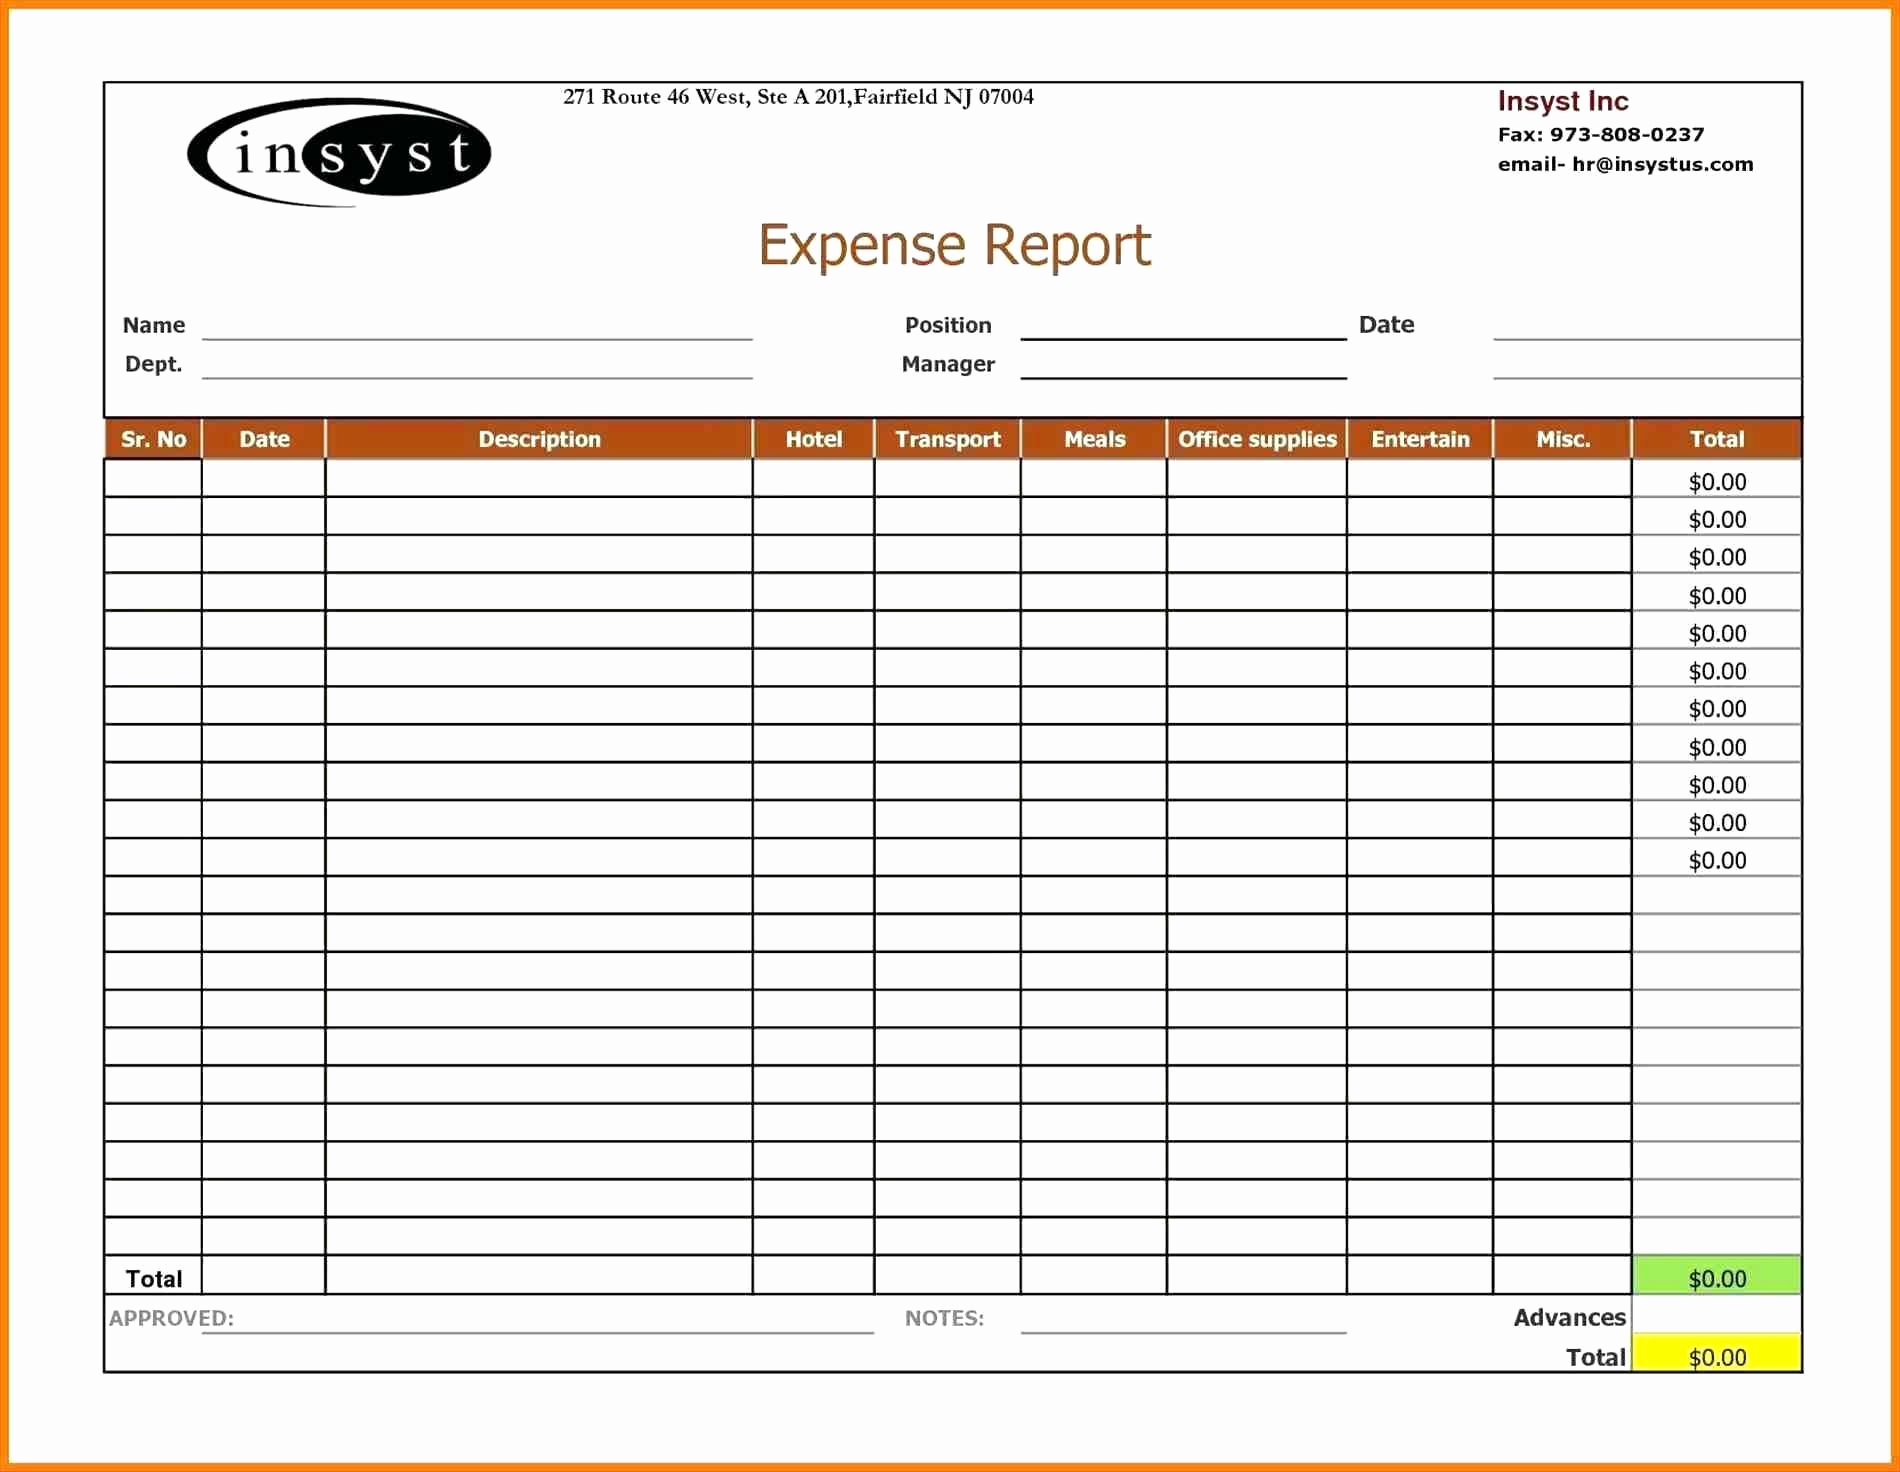 Income and Expense Worksheet Template Luxury Sample Church In E and Expense Report Heritage Spreadsheet